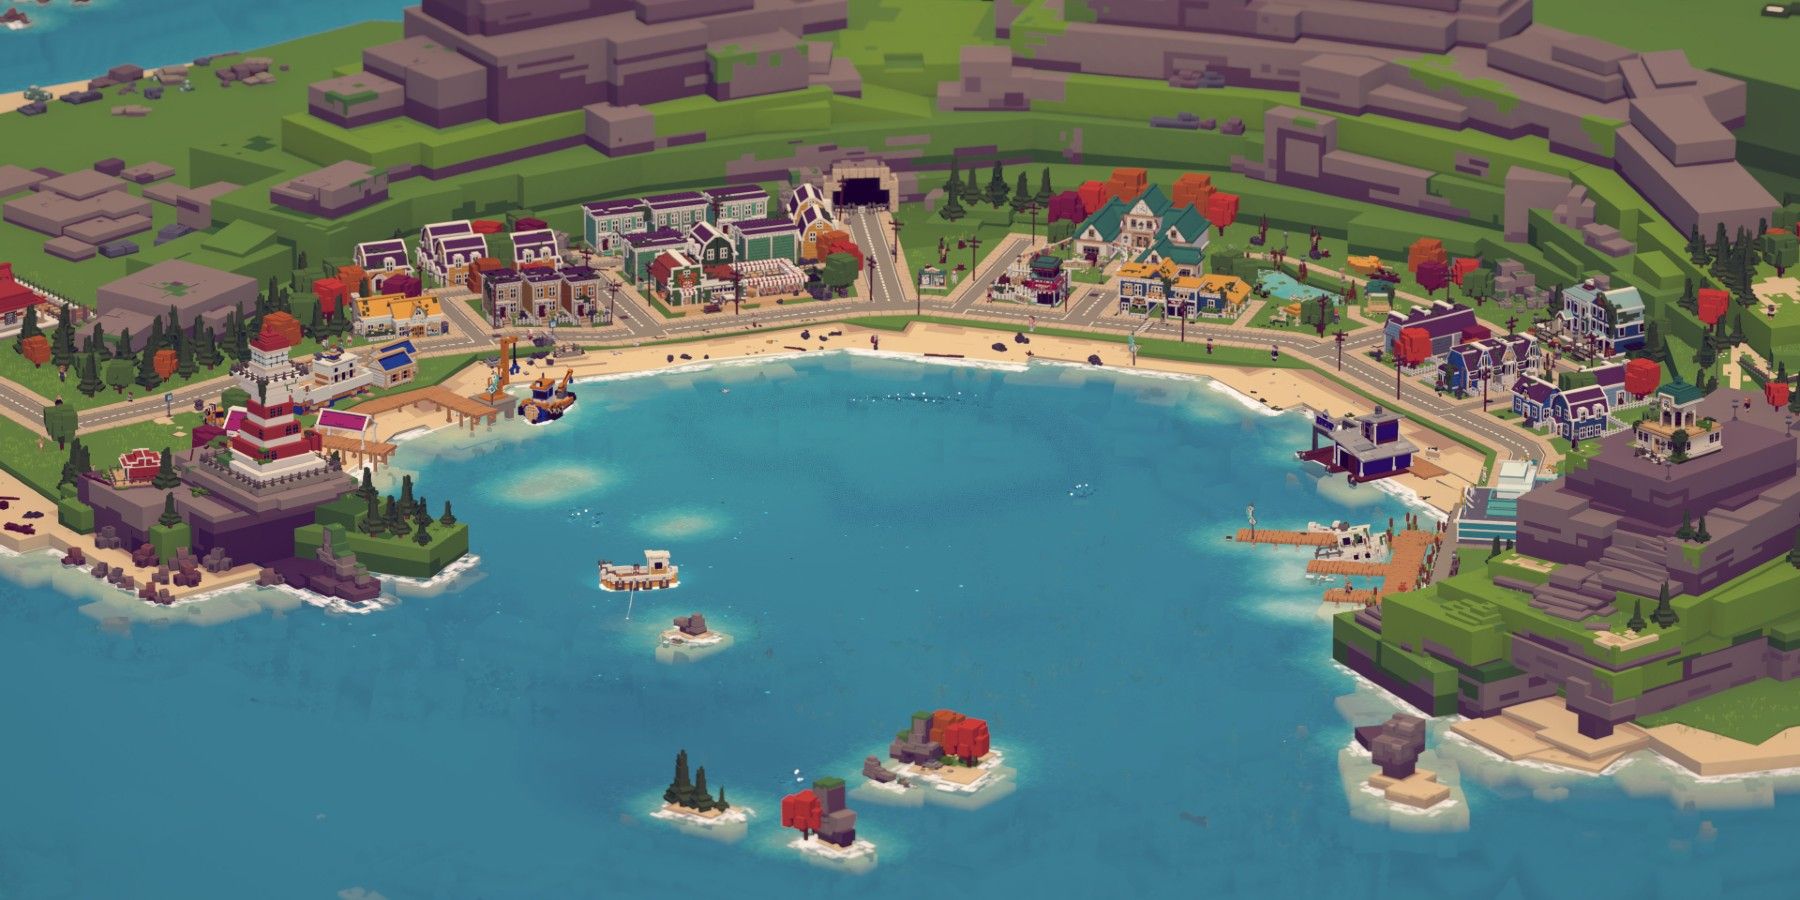 https://static0.gamerantimages.com/wordpress/wp-content/uploads/2021/08/Quirky-Fishing-Game-Moonglow-Bay-is-Day-One-Xbox-Game-Pass-Game-Release-Date-Confirmed.jpg